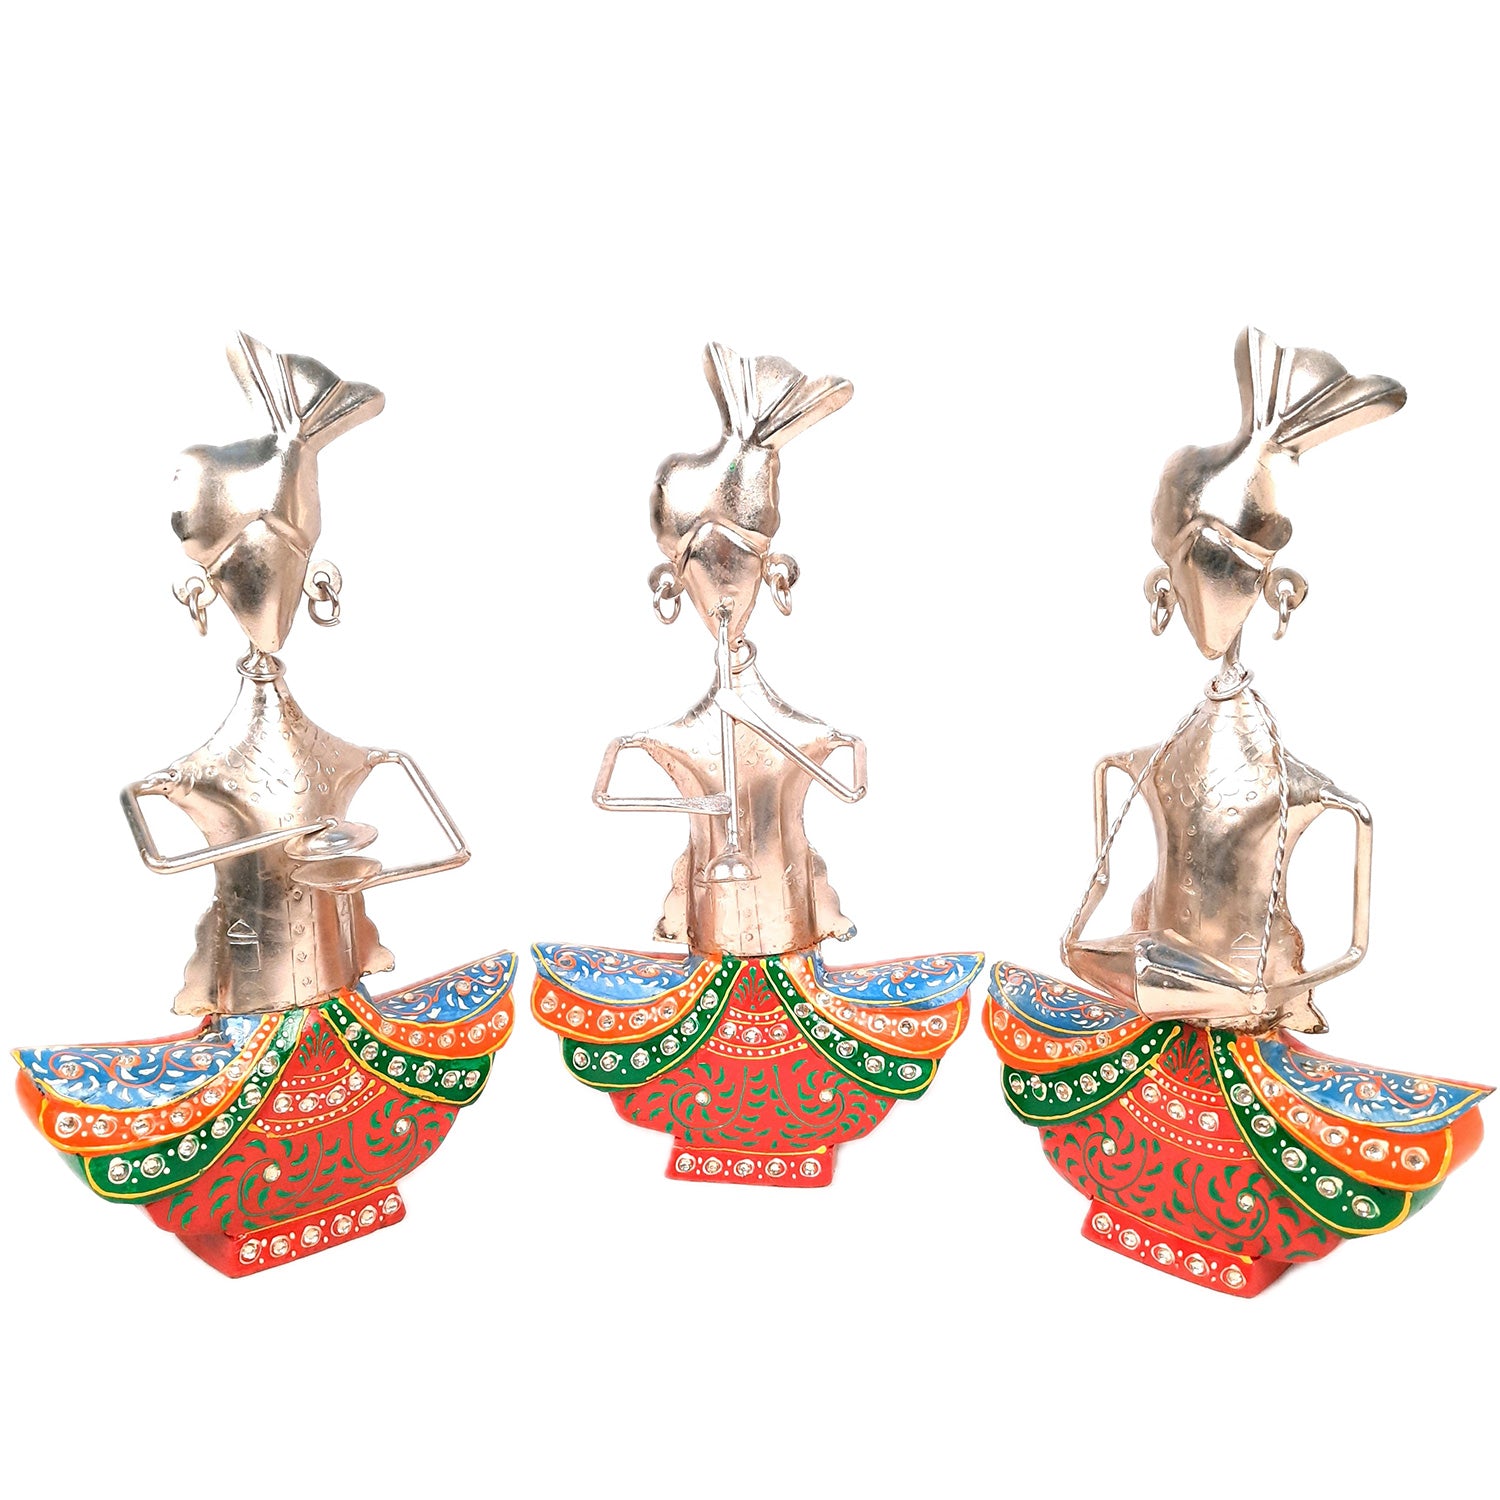 Showpiece Figurine - Rajasthani Musicians | Decorative Show piece for Home, Bedroom, Living Room, Office Desk & Table Decor | Gifts For Wedding, Housewarming & Festivals- 13 Inch (Set of 3)